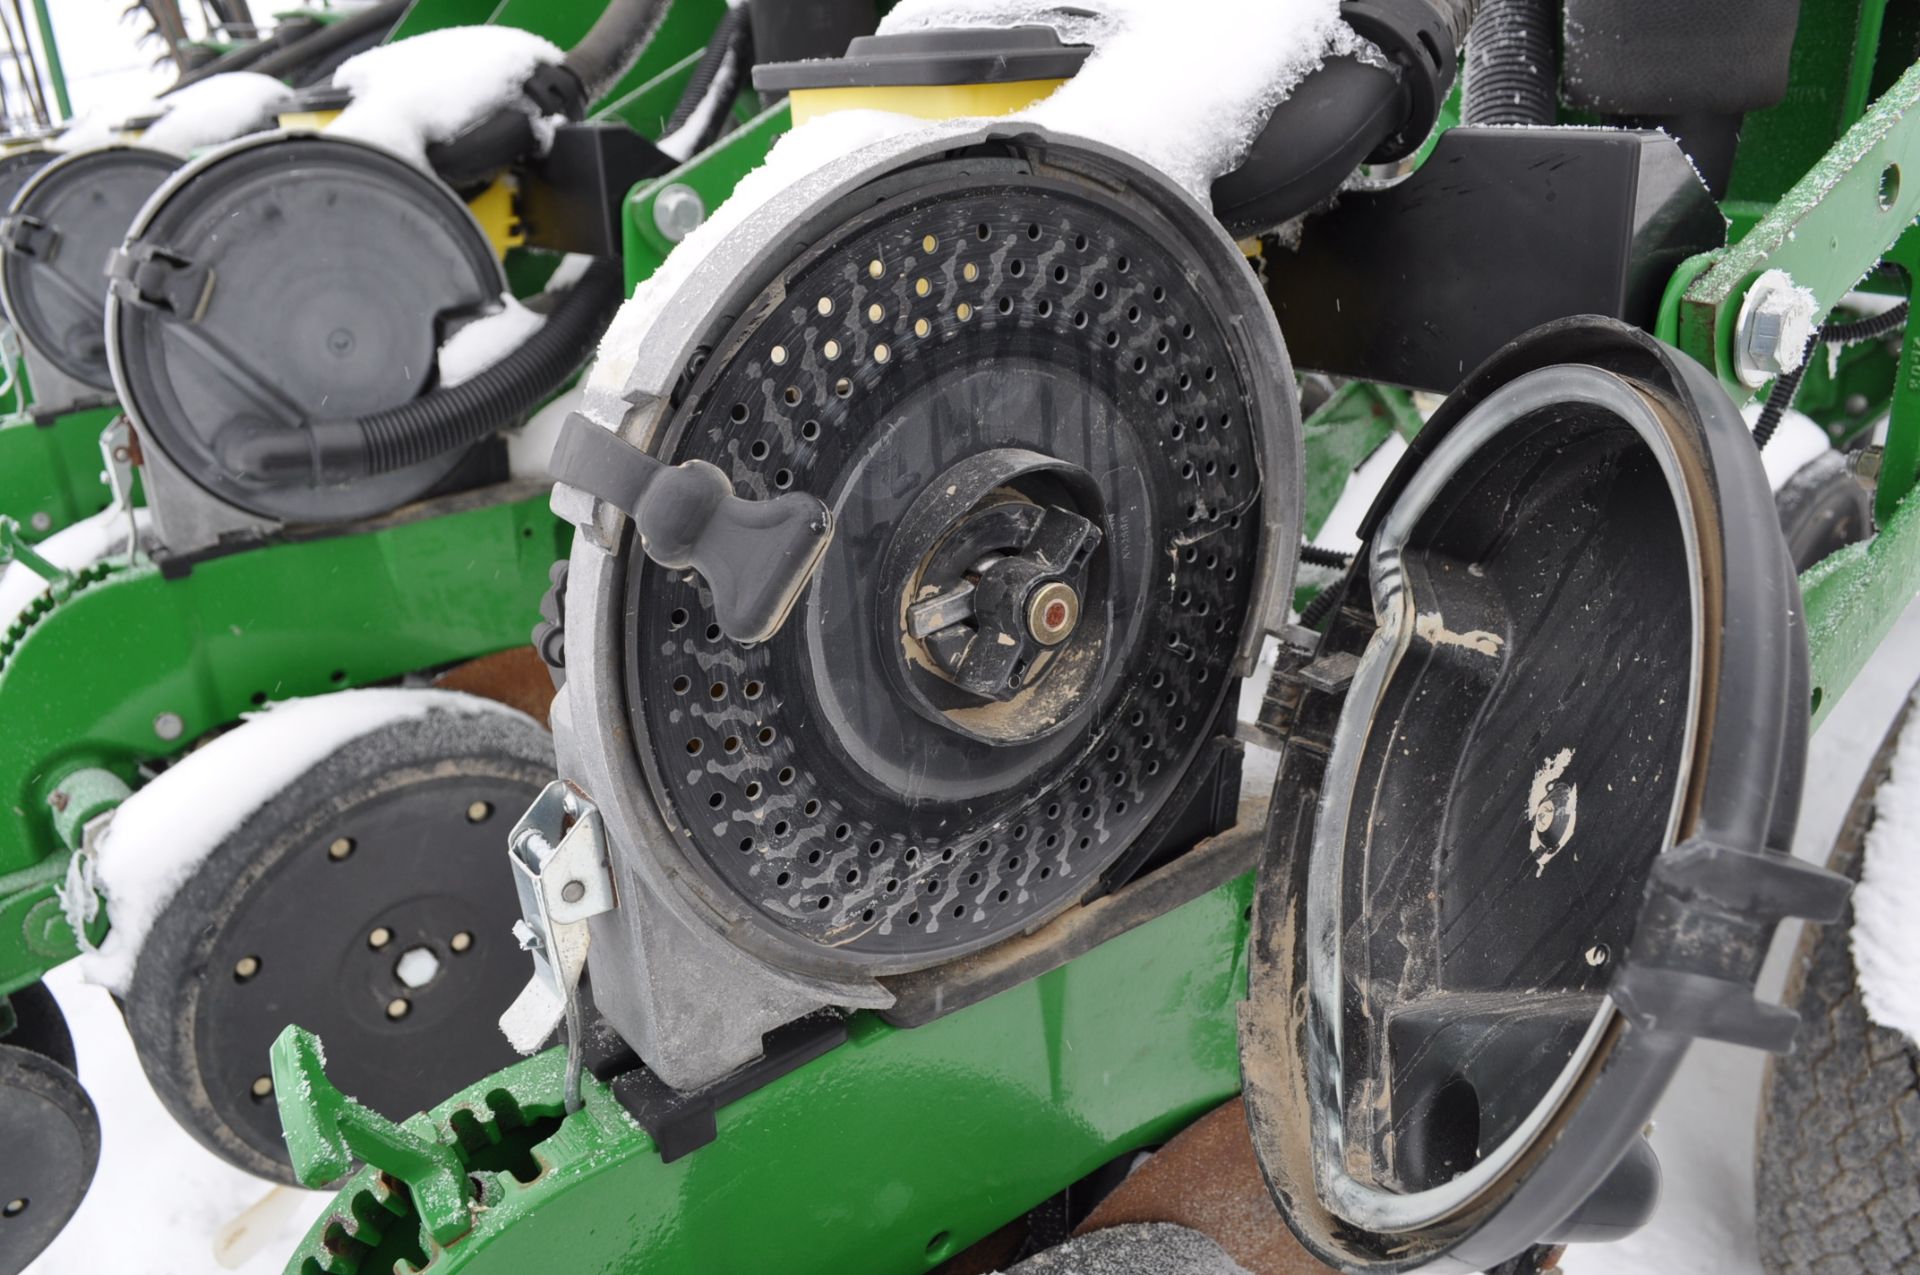 John Deere 1790 16/32 planter, CCS seed delivery, row cleaners, markers, seed firmers, SN 750247 - Image 9 of 14